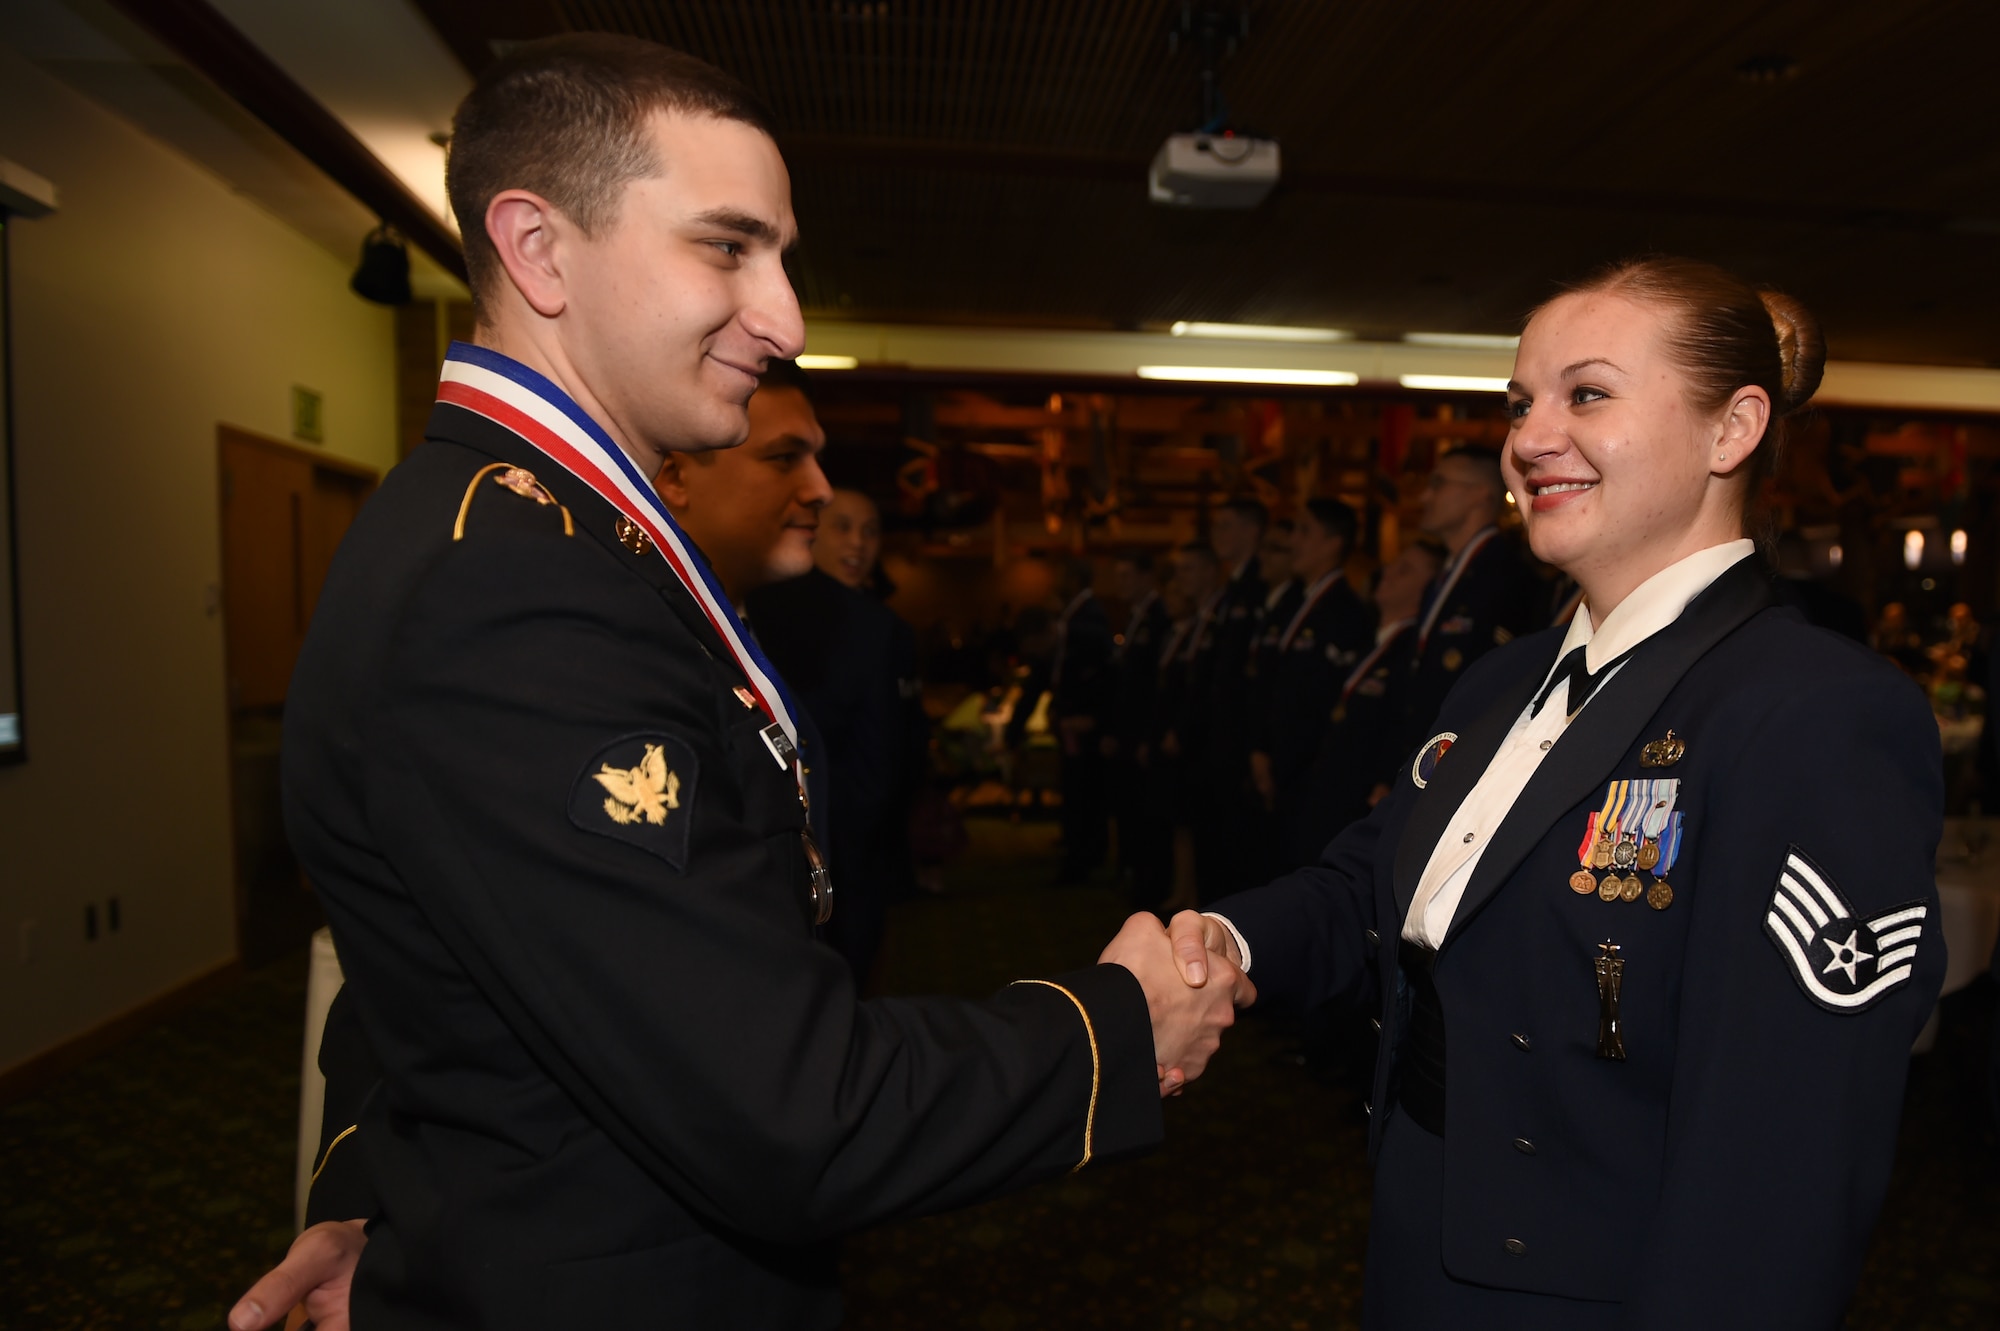 Spc. Andrew Affonso, Henry H. Lind NCO Academy information technology specialist, shakes the hand of his instructor, Staff Sgt. Jessica Raab, Joint Base Lewis-McChord Julius A. Kolb Airman Leadership School instructor, during the medallion ceremony at the Julius A. Kolb ALS graduation Feb. 10, 2016, at Joint Base Lewis-McChord, Wash. Affonso attend ALS right after graduating the Army’s Basic Leaders Course on Lewis. (U.S. Air Force photo/Staff Sgt. Naomi Shipley)